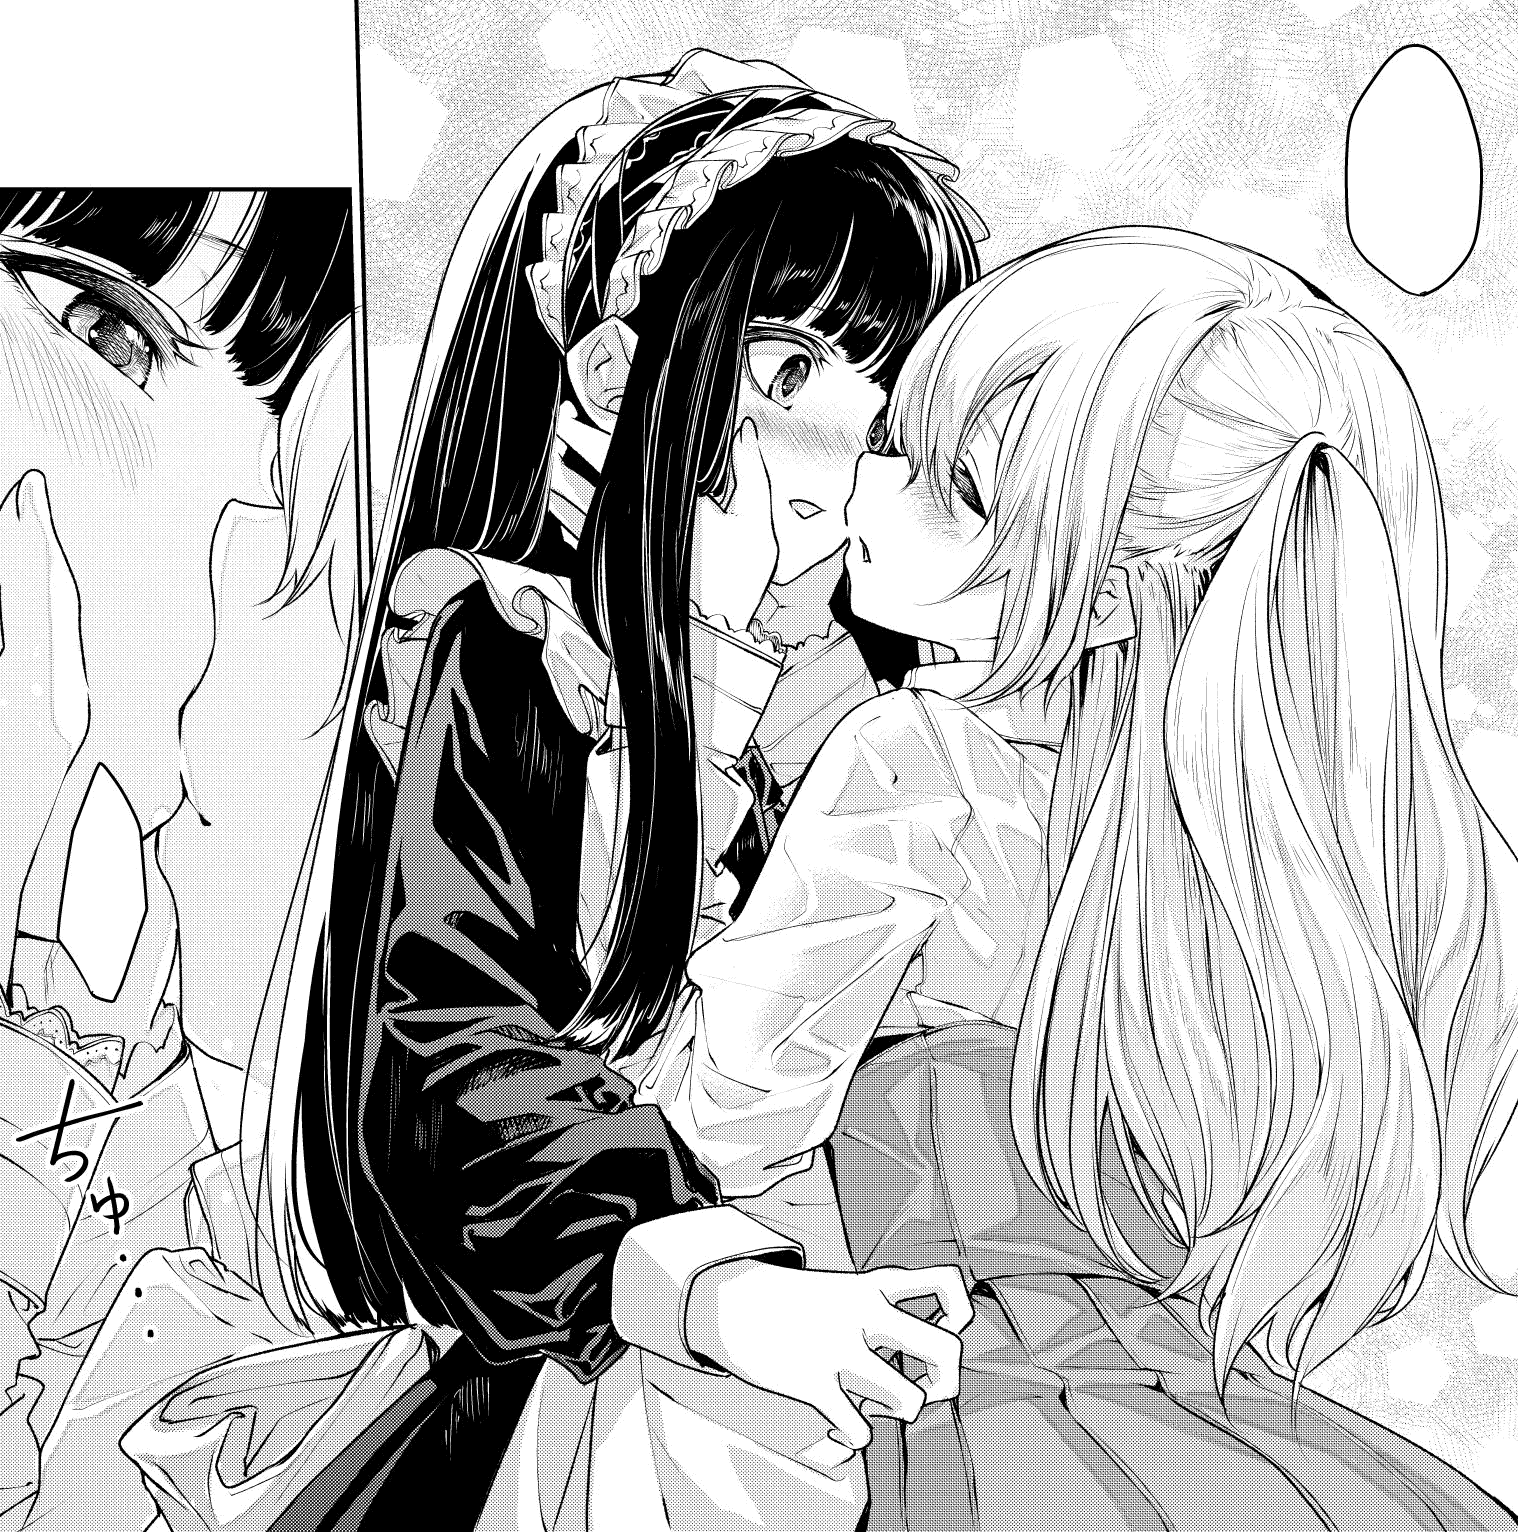 The Hidden Love of the Young Mistress and her Maid manga